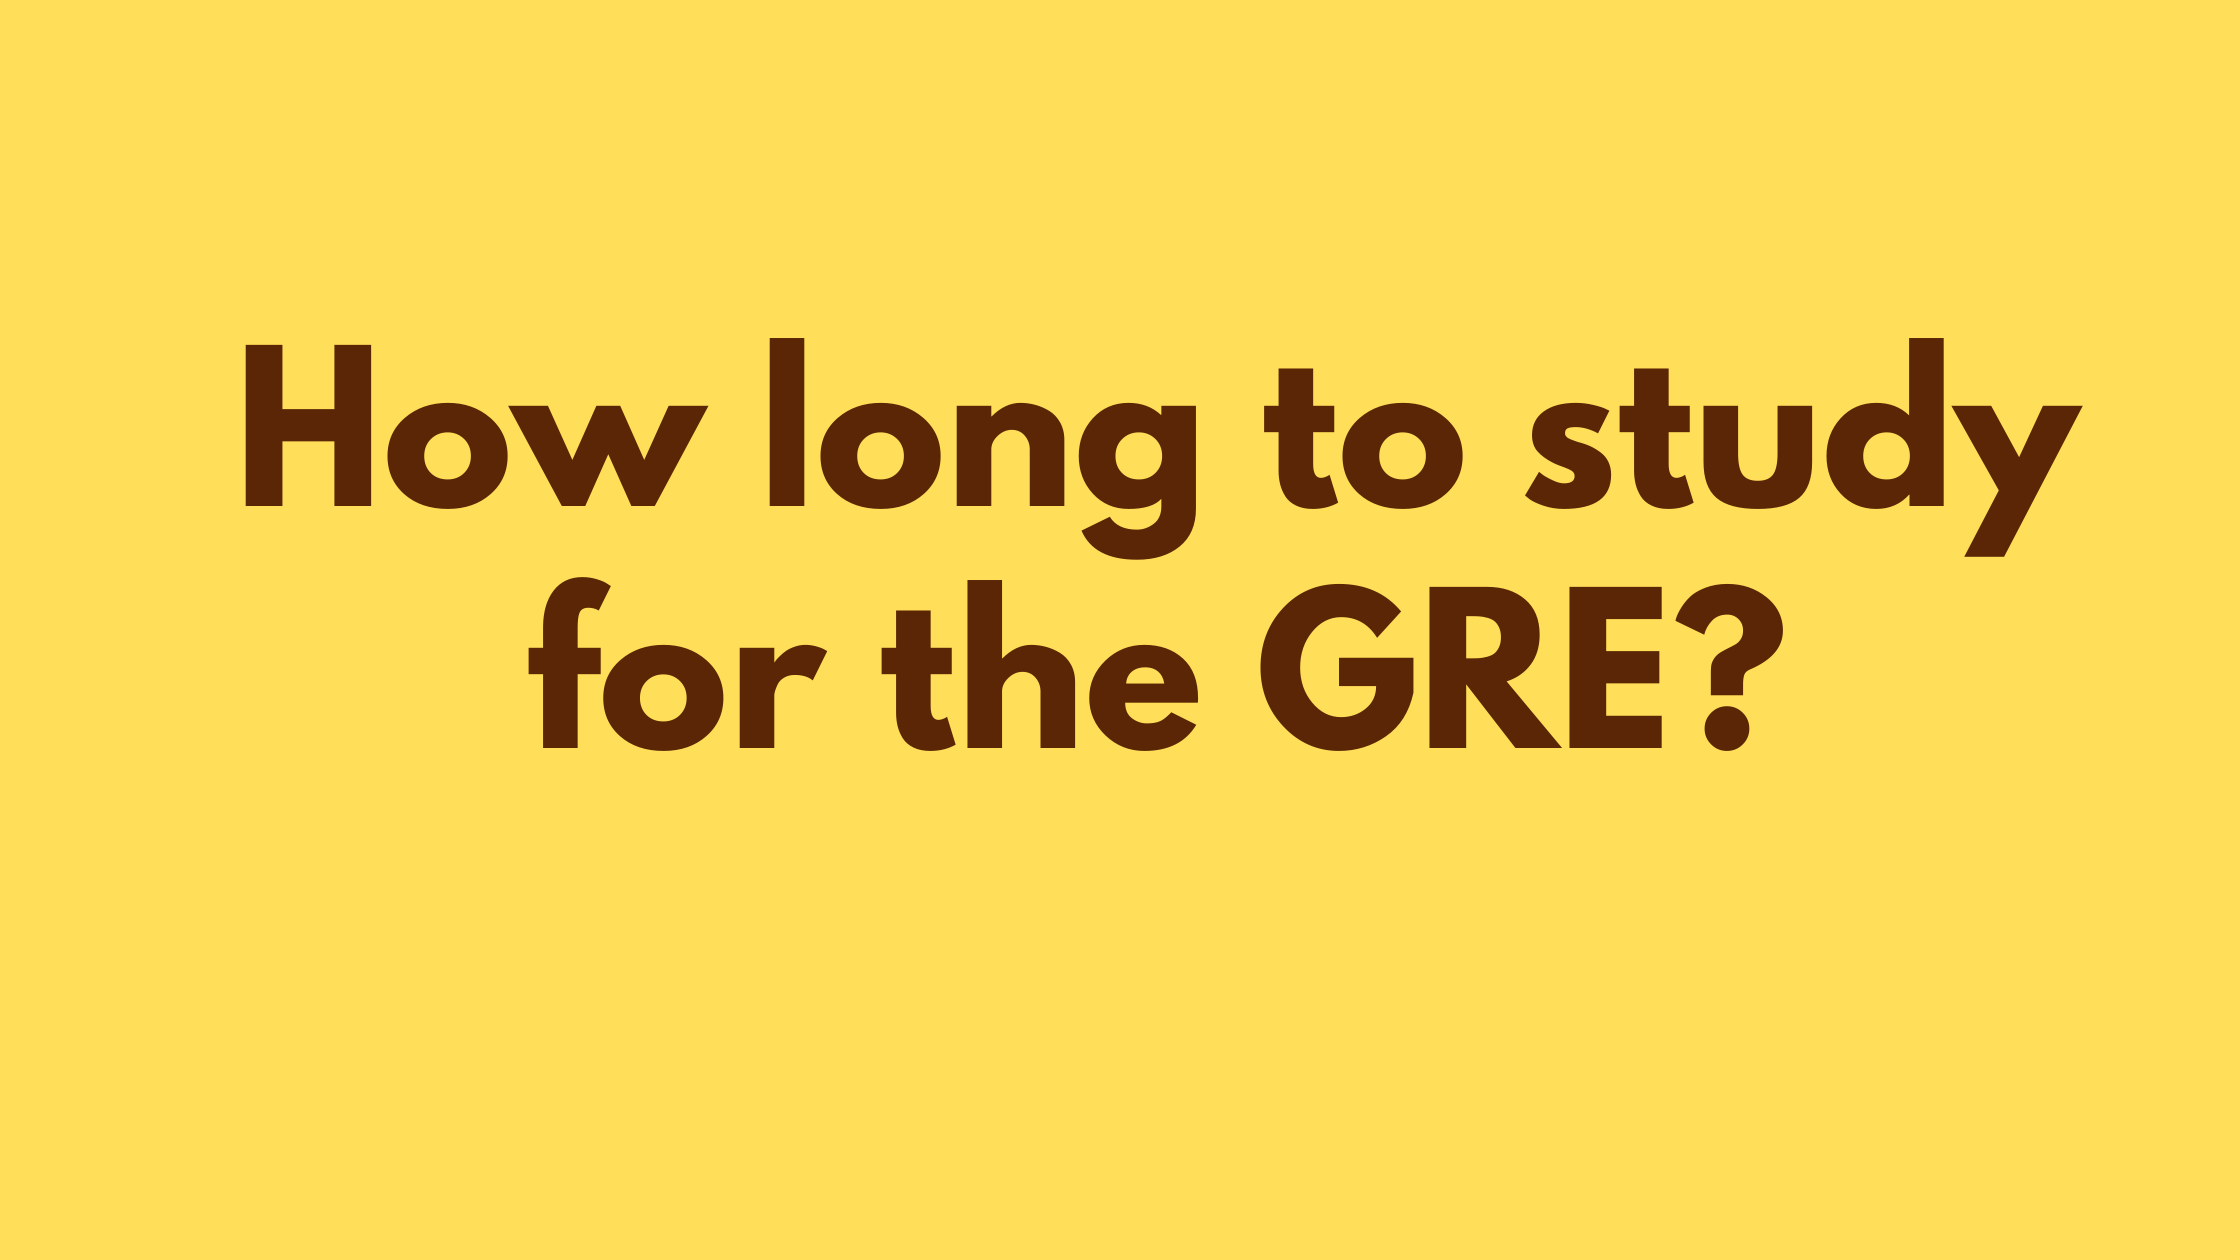 How Long to study for the GRE?